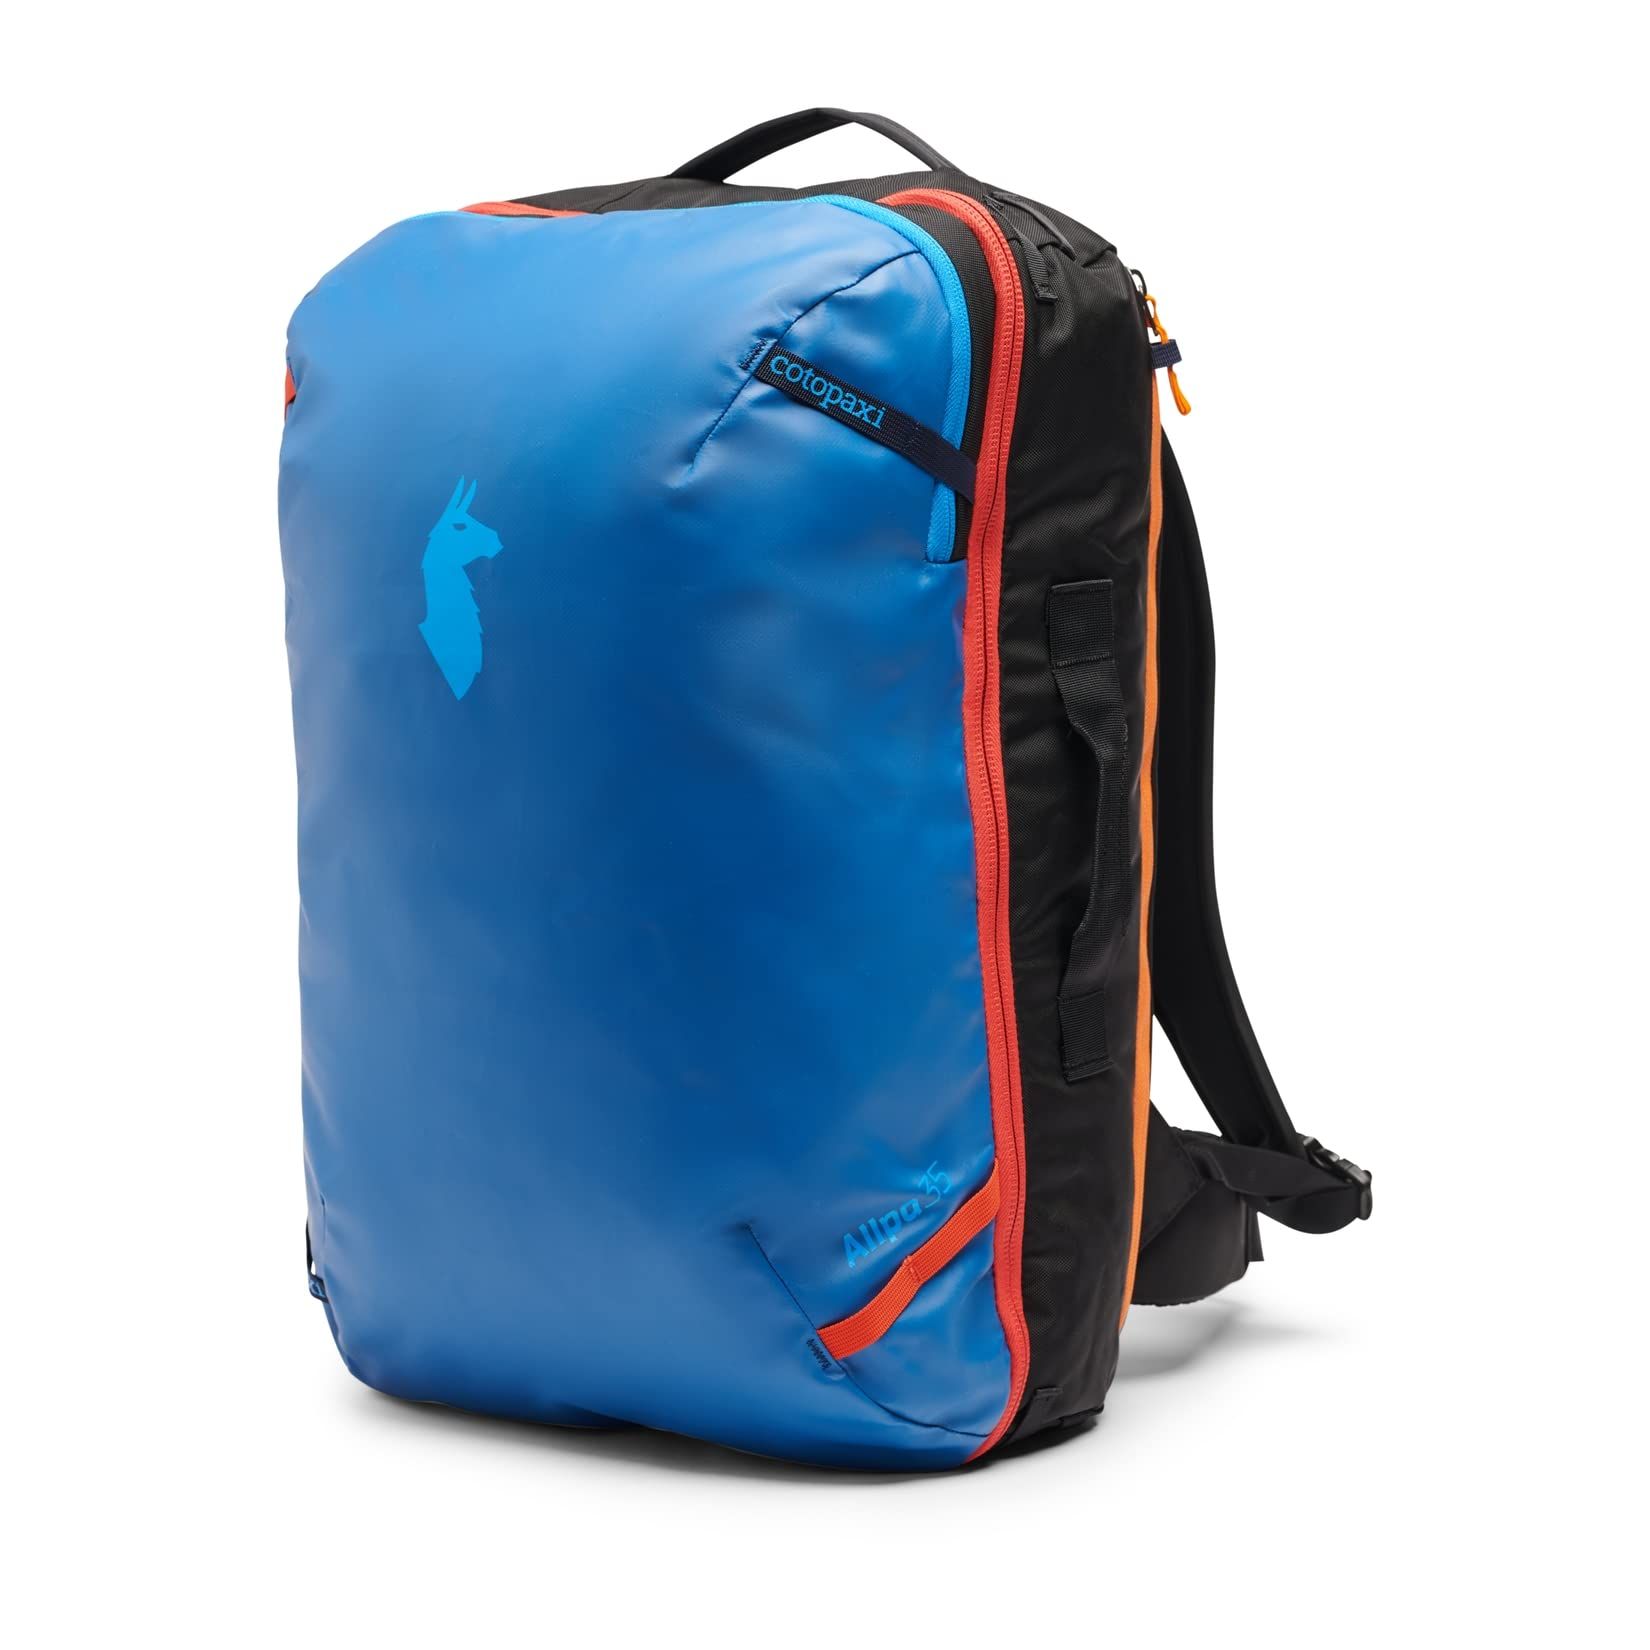 <p><strong>$200.00</strong></p><p>We were shocked by just how much we could fit inside this travel backpack during our packing tests. In fact, <strong>it outperformed multiple carry-on suitcases for its generous capacity</strong> and well-designed interior. Similar to hard-side luggage, the bag completely unzips for easy packing and, in this case, features helpful mesh to help separate compartments. </p><p>On top of that, we liked the helpful ergonomic features, from the padding along the back to the hip strap and sternum strap, which offer comfort and support. Plus, when testing the laptop sleeve, we found there was room to spare after placing a 16-inch laptop in it. The only note of caution is that the bag doesn't have a luggage sleeve, so if you're hoping to stack it on top of rolling luggage, it may not be the right fit.</p>